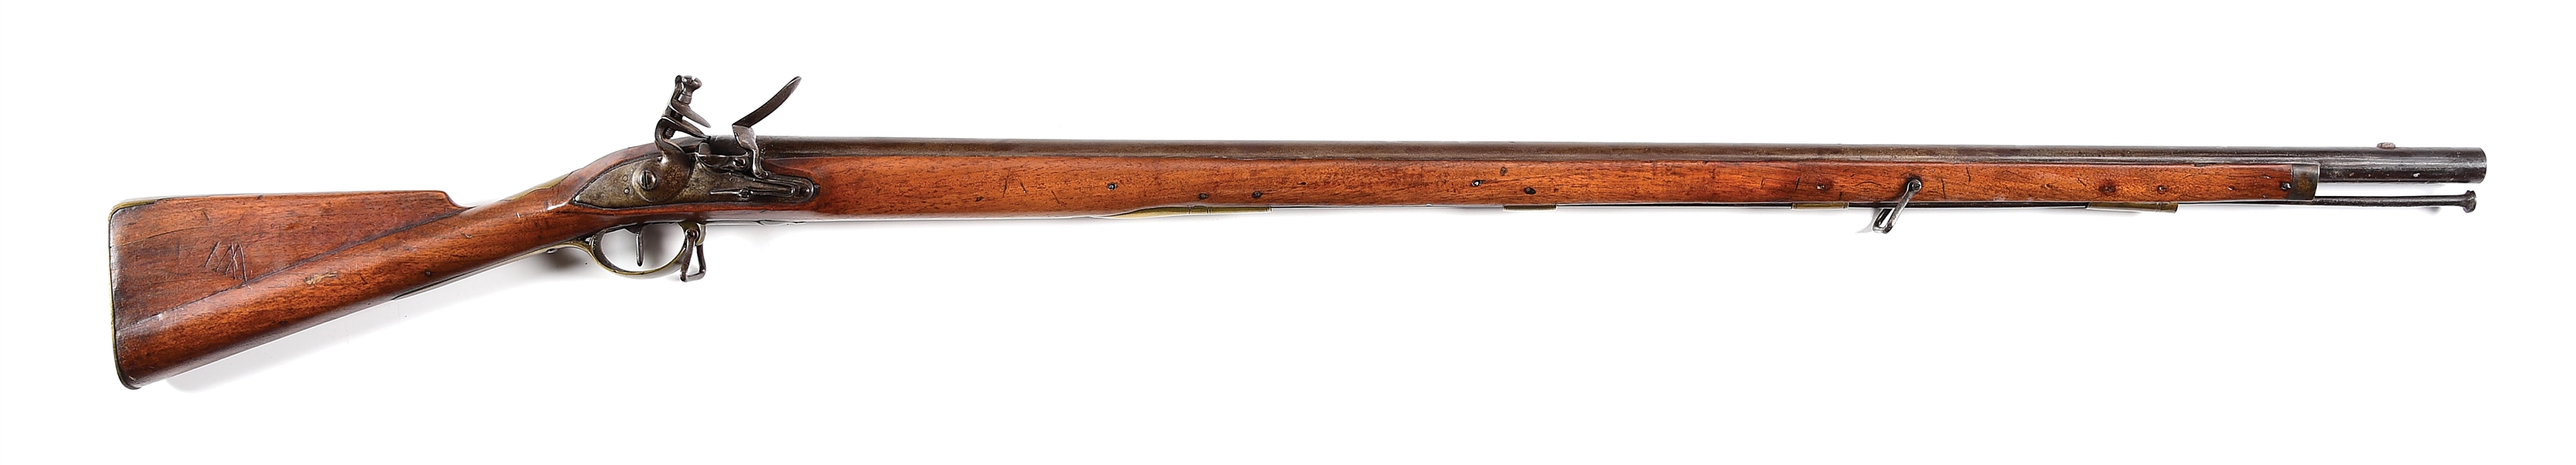 (A) SAMUEL SMITH ATTRIBUTED MARYLAND COMMITTEE OF SAFETY TYPE MUSKET.